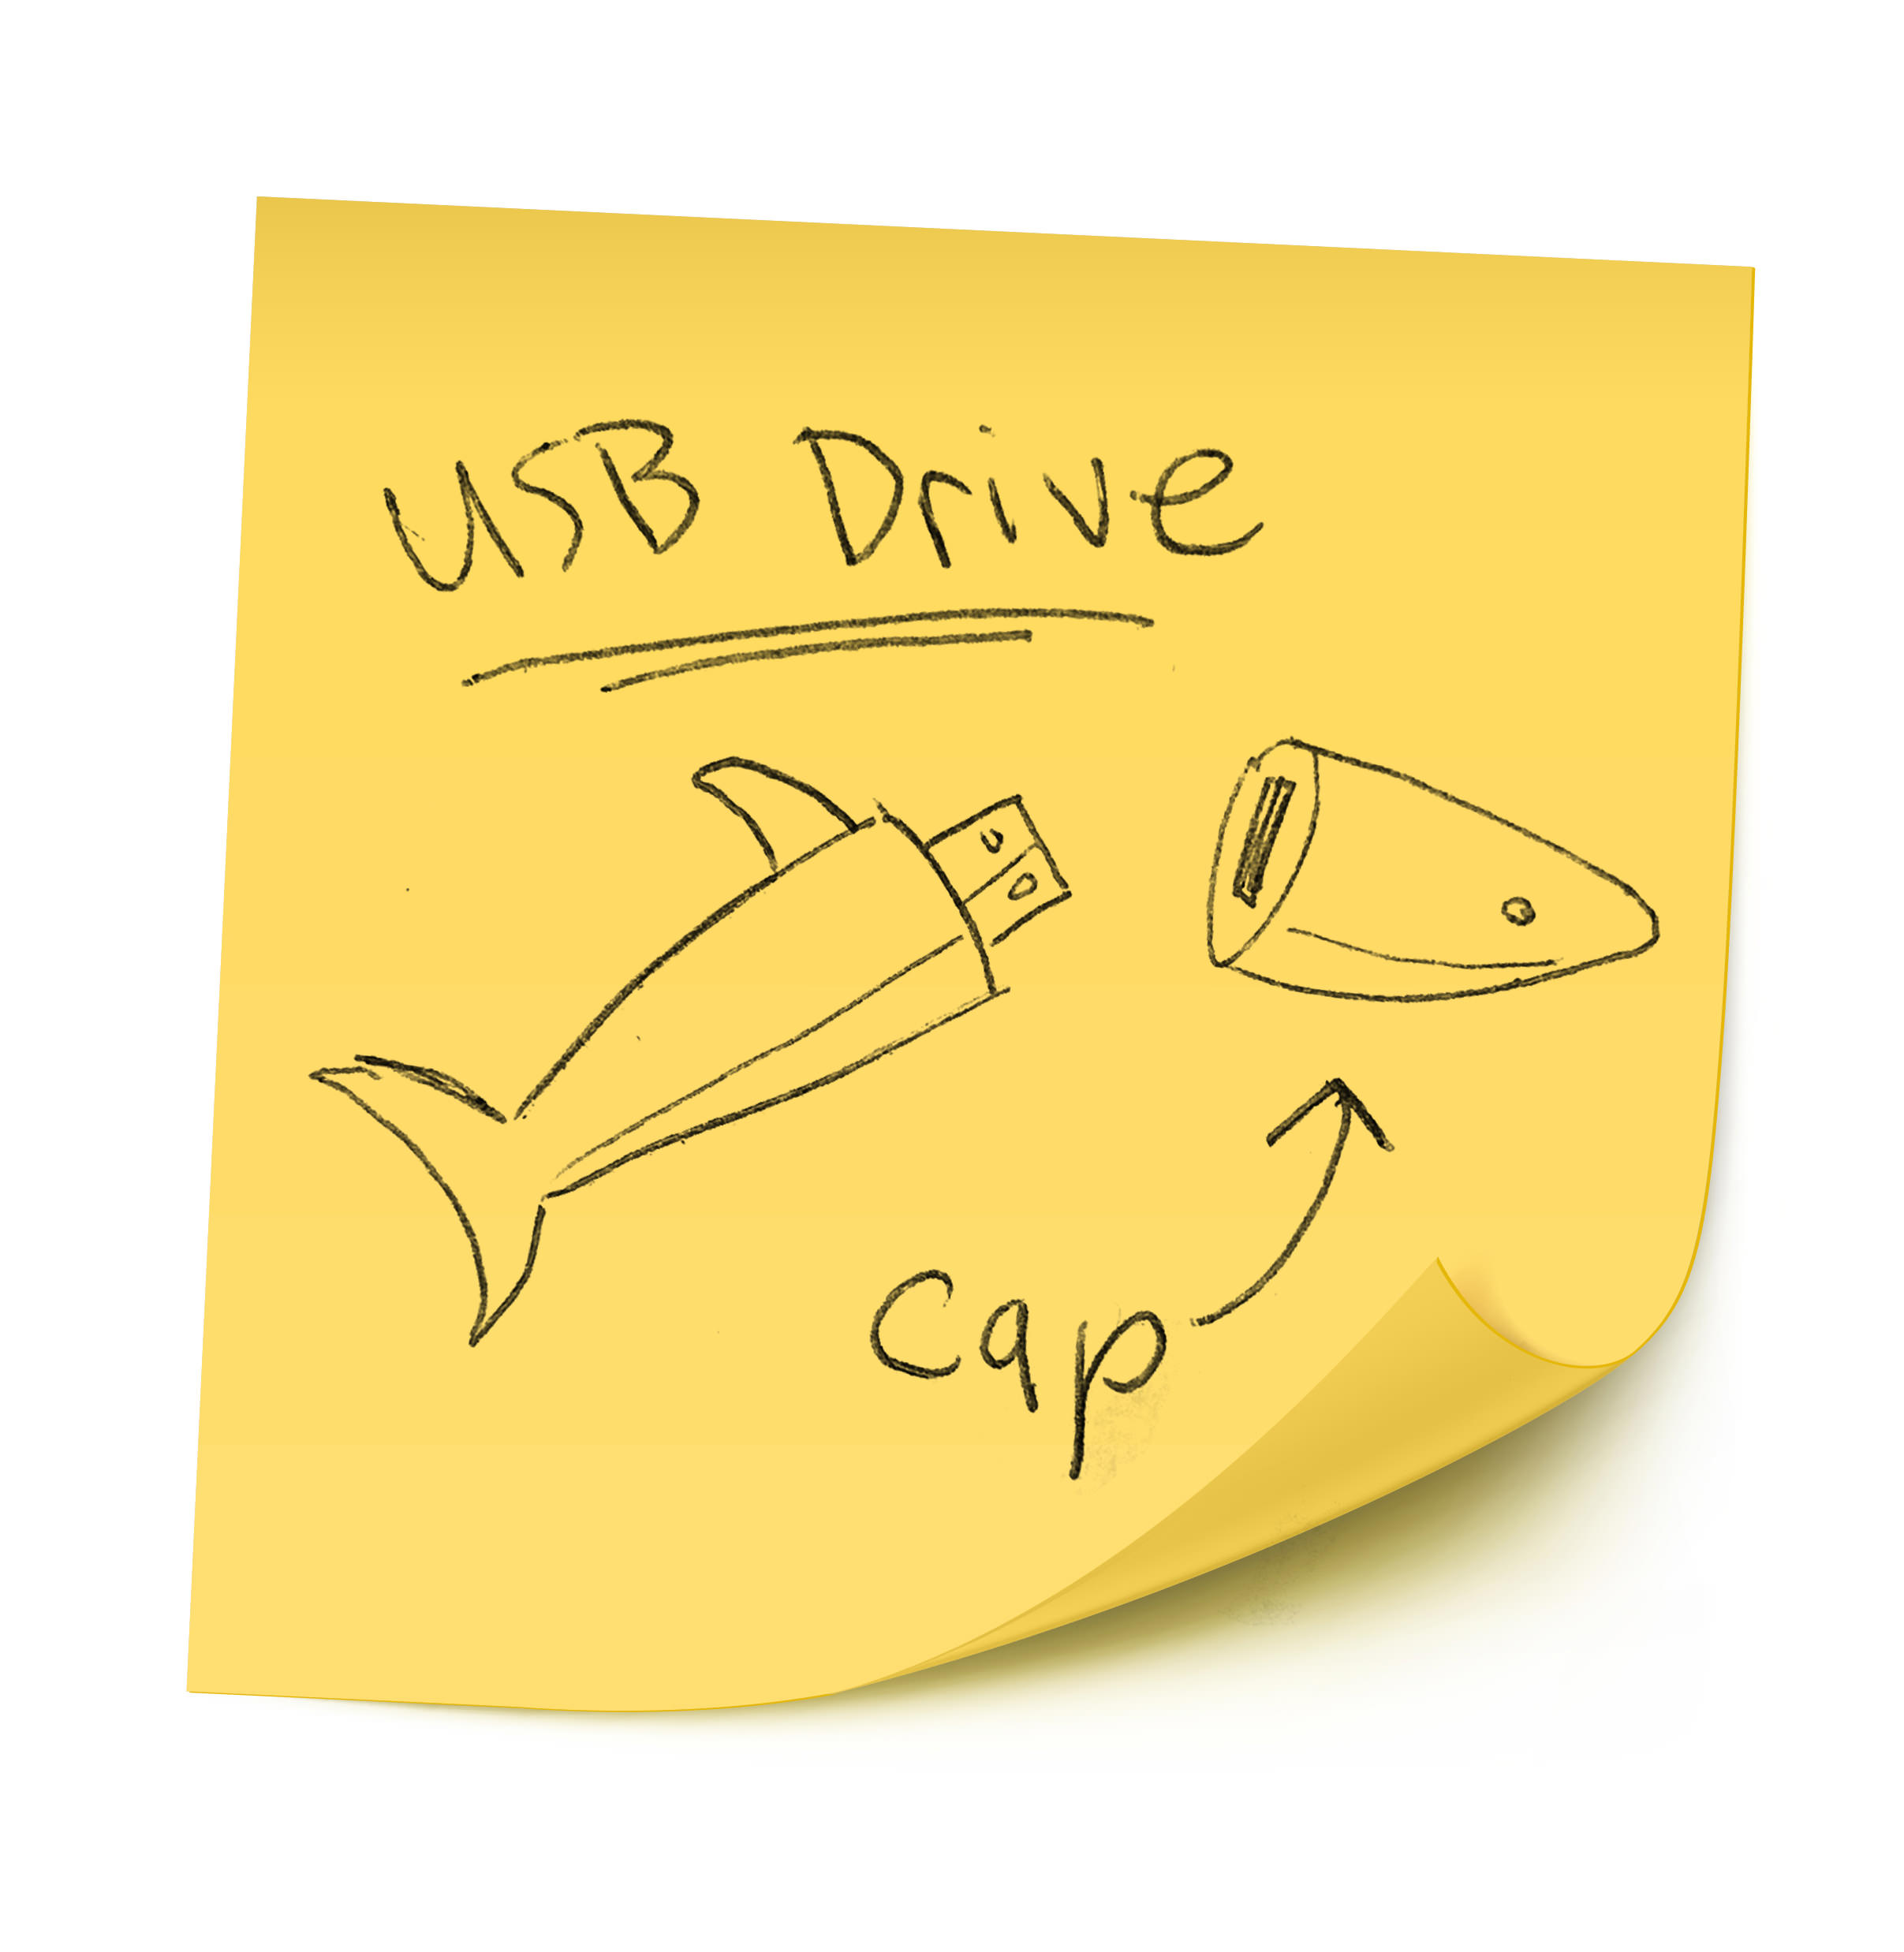 3d rendering of usb drive.